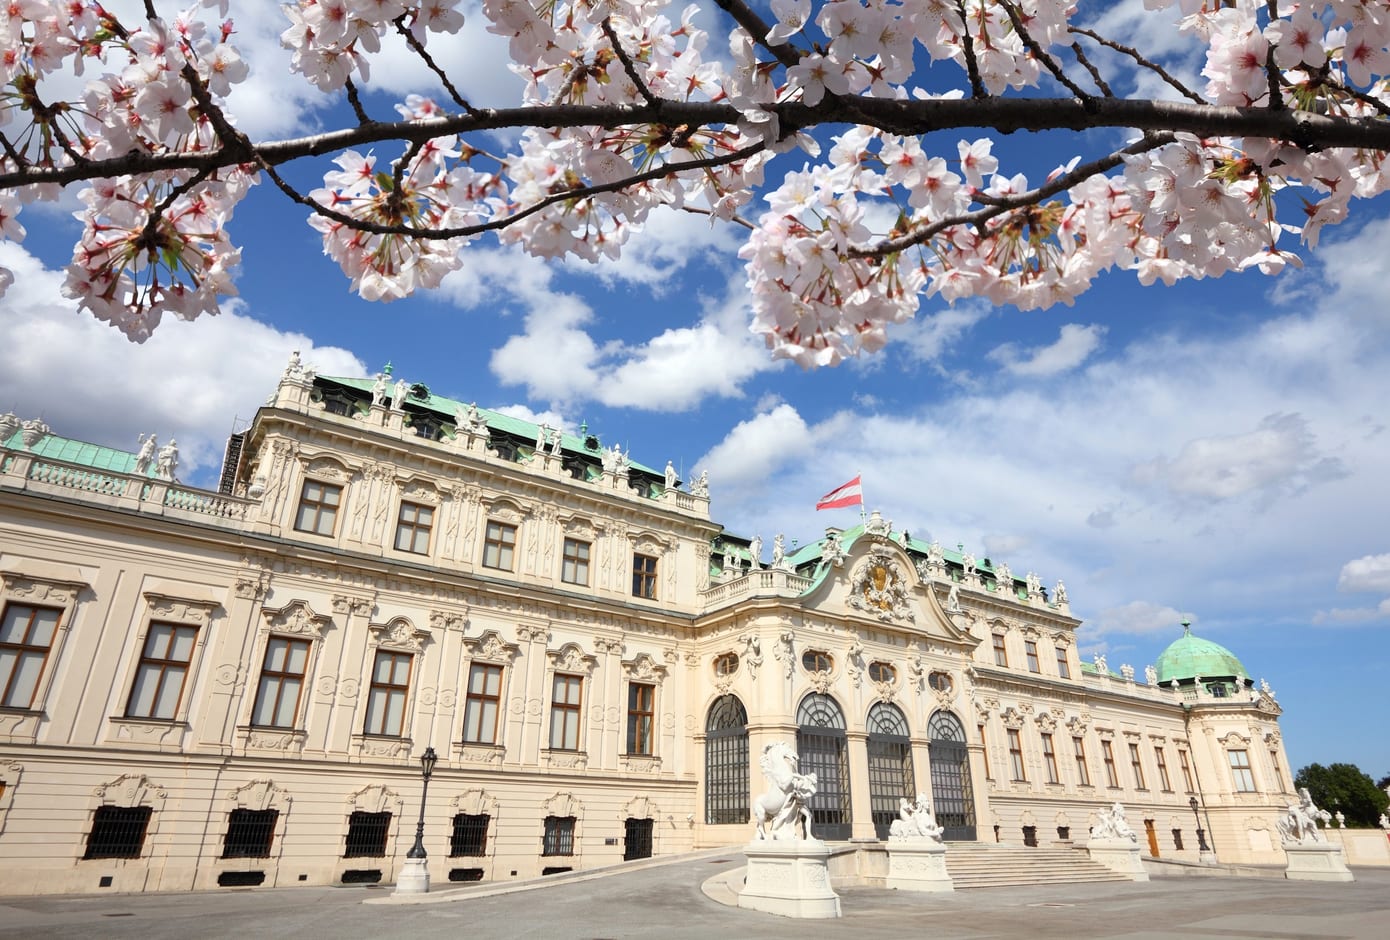 Cherry blossom tree and the Belvedere Palace in Vienna, Austria.
